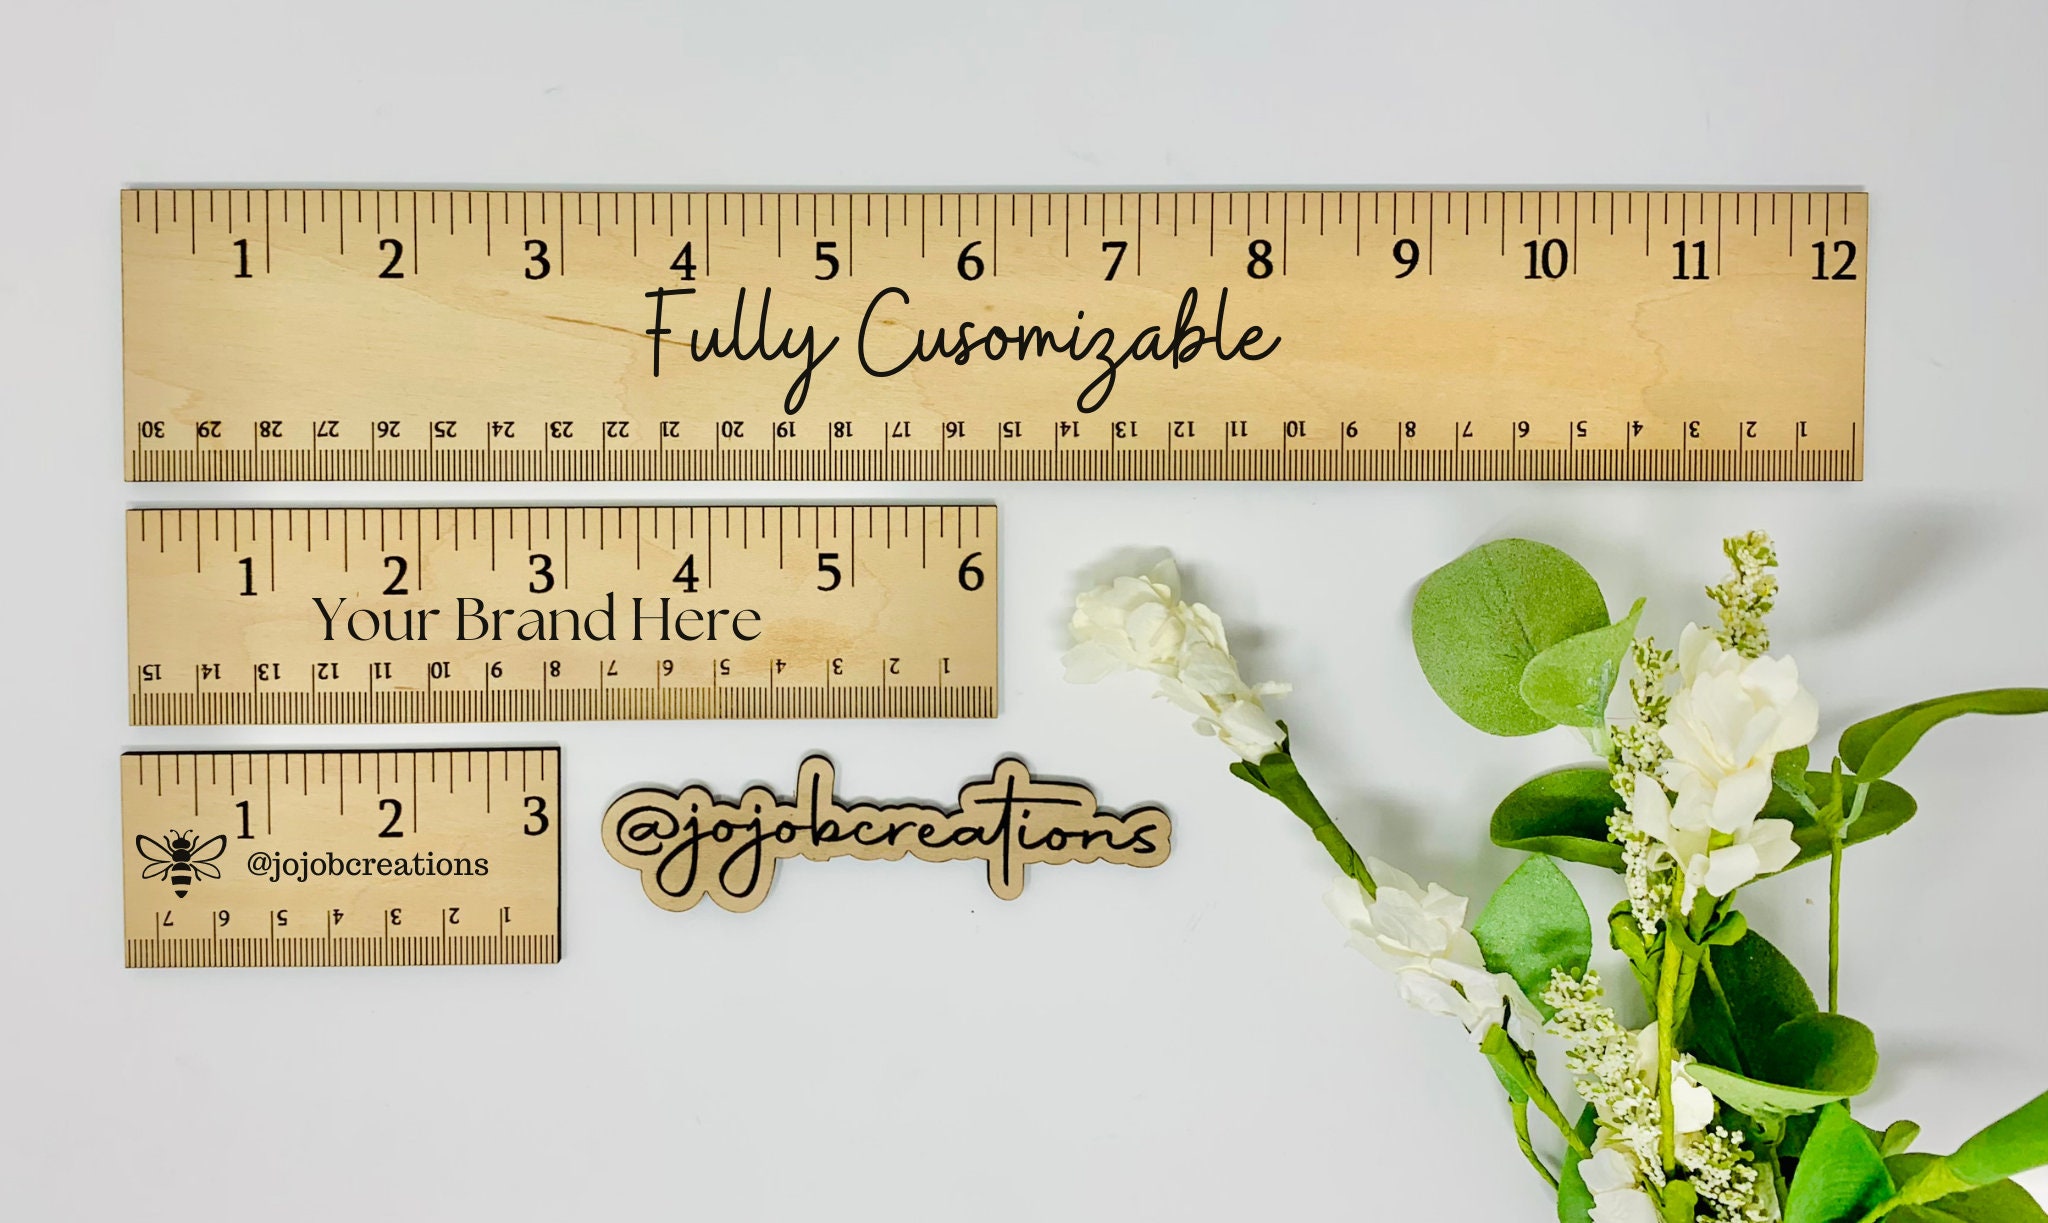 75 Personalized Key Chain / Measuring Tape Favors Set of 75 